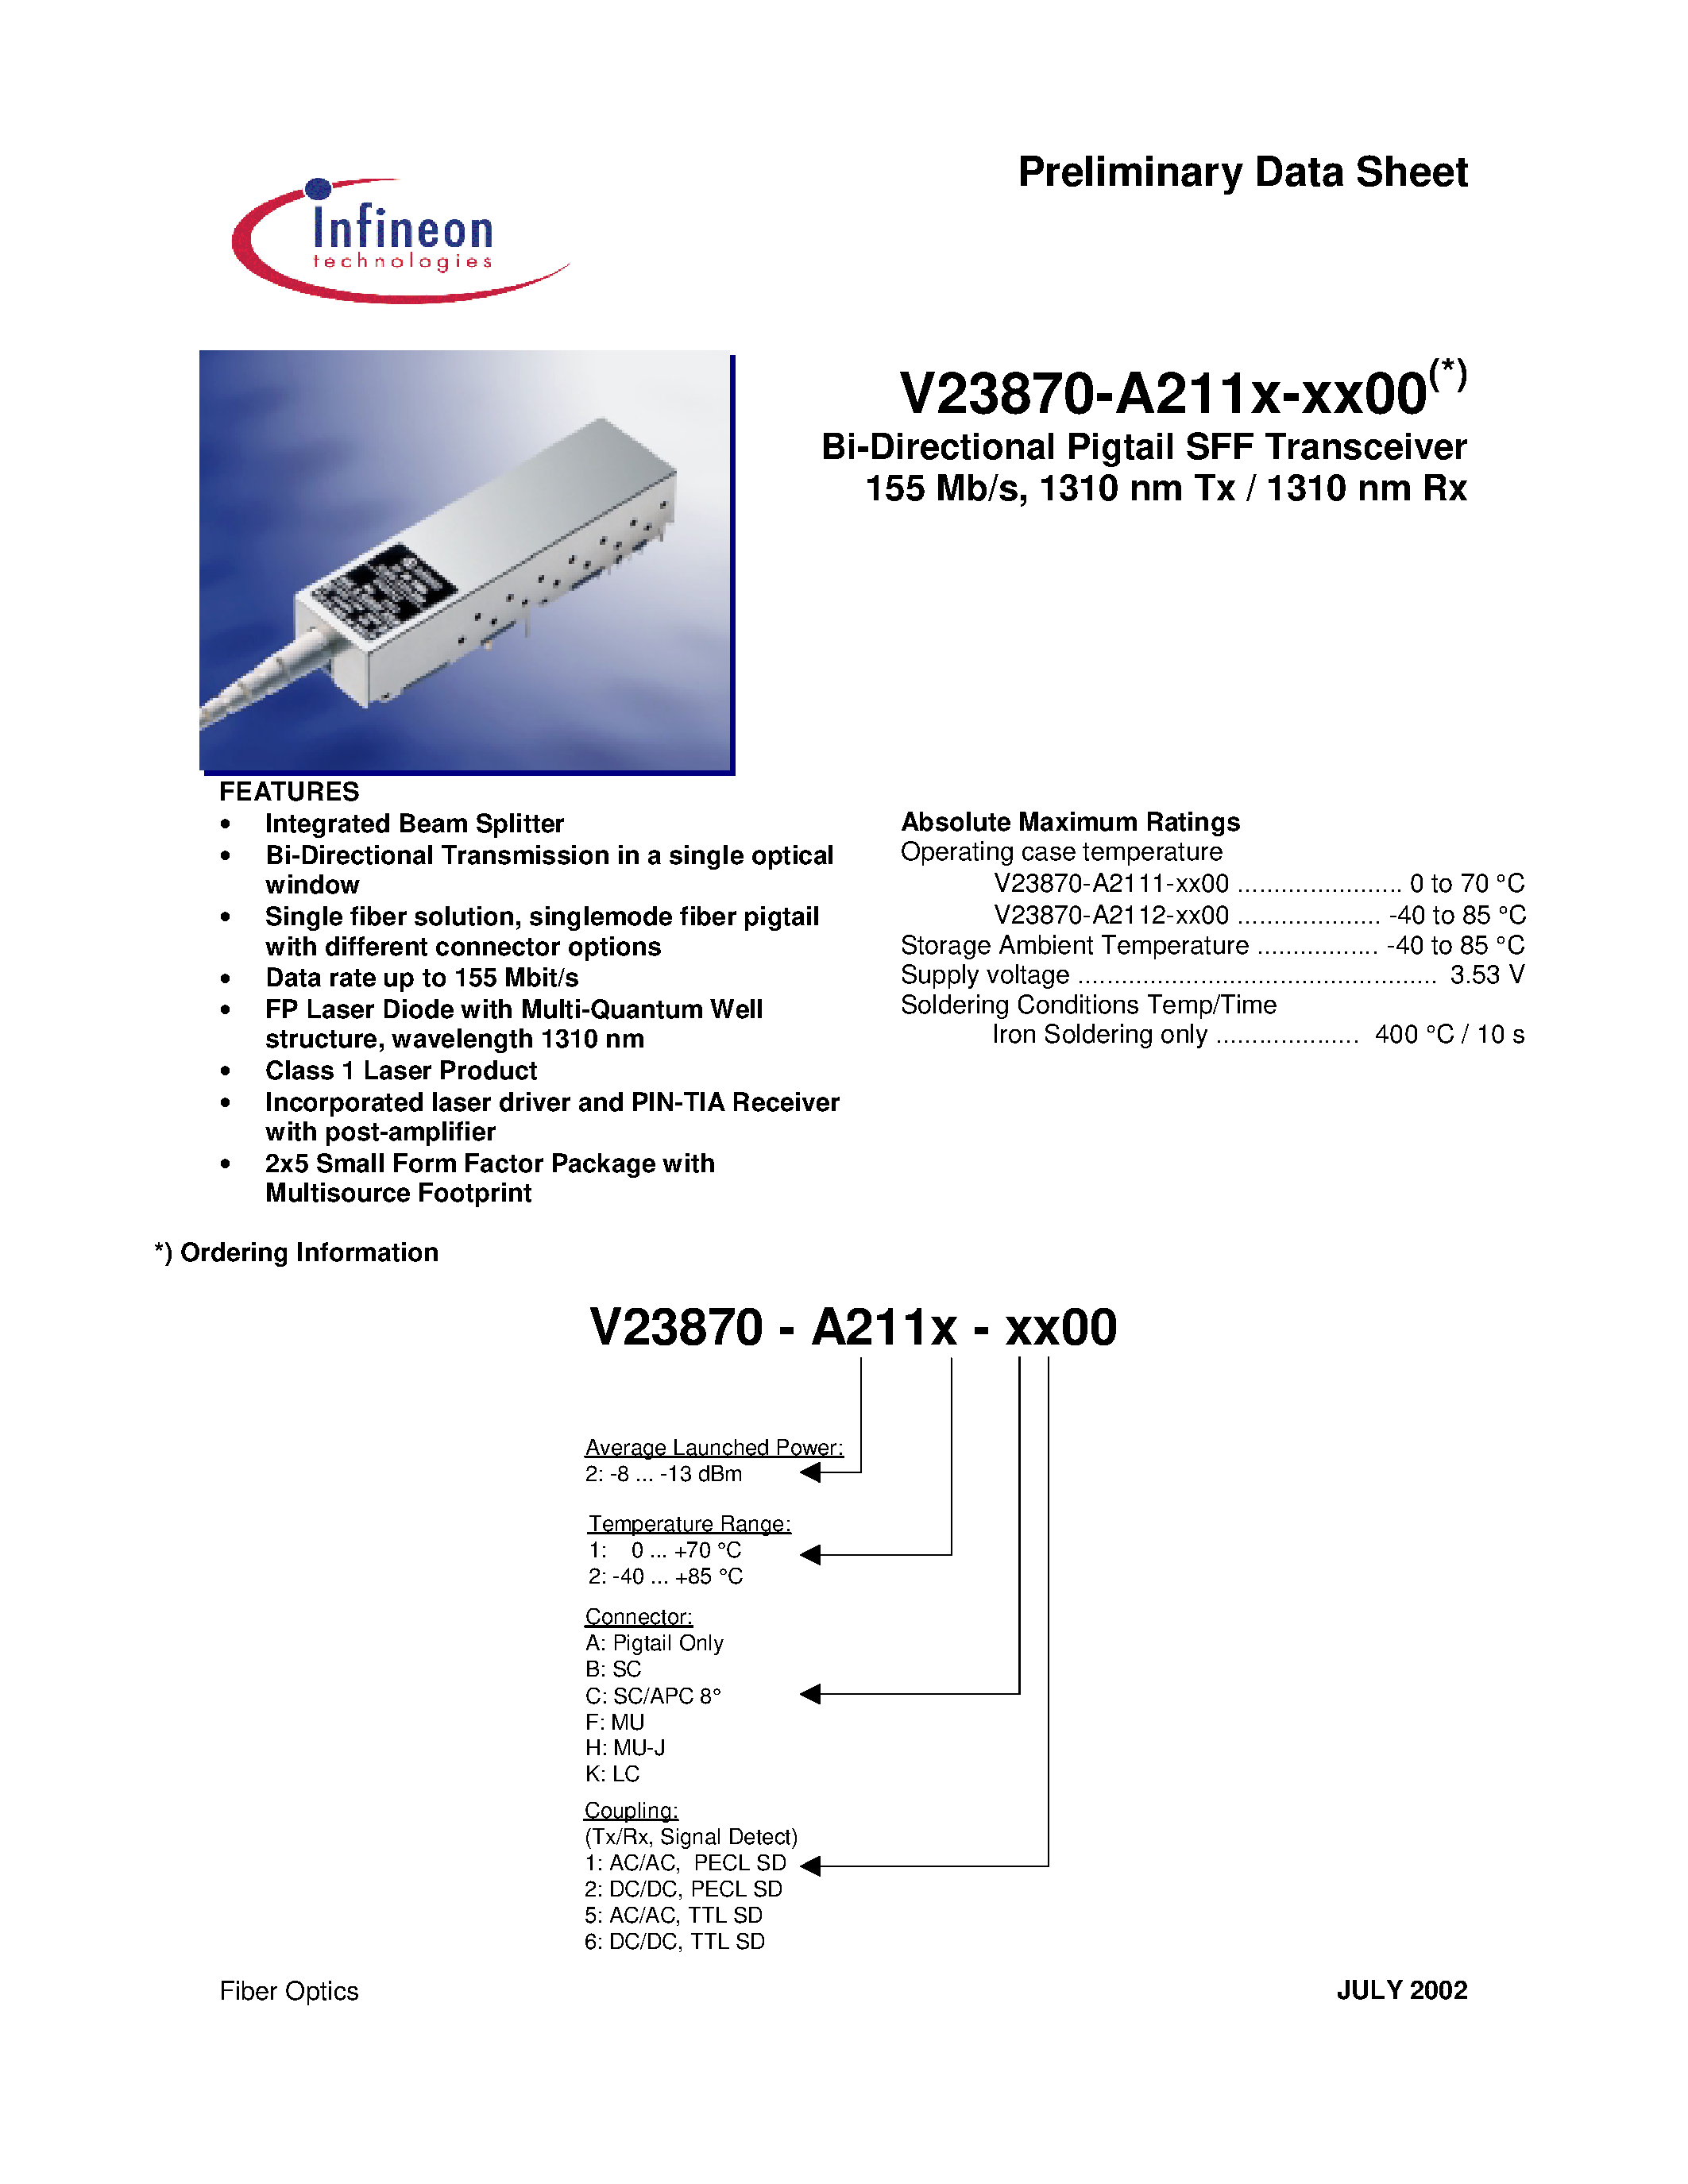 Datasheet V23870-A2111-K100 - Bi-Directional Pigtail SFF Transceiver 155 Mb/s/ 1310 nm Tx / 1310 nm Rx page 1